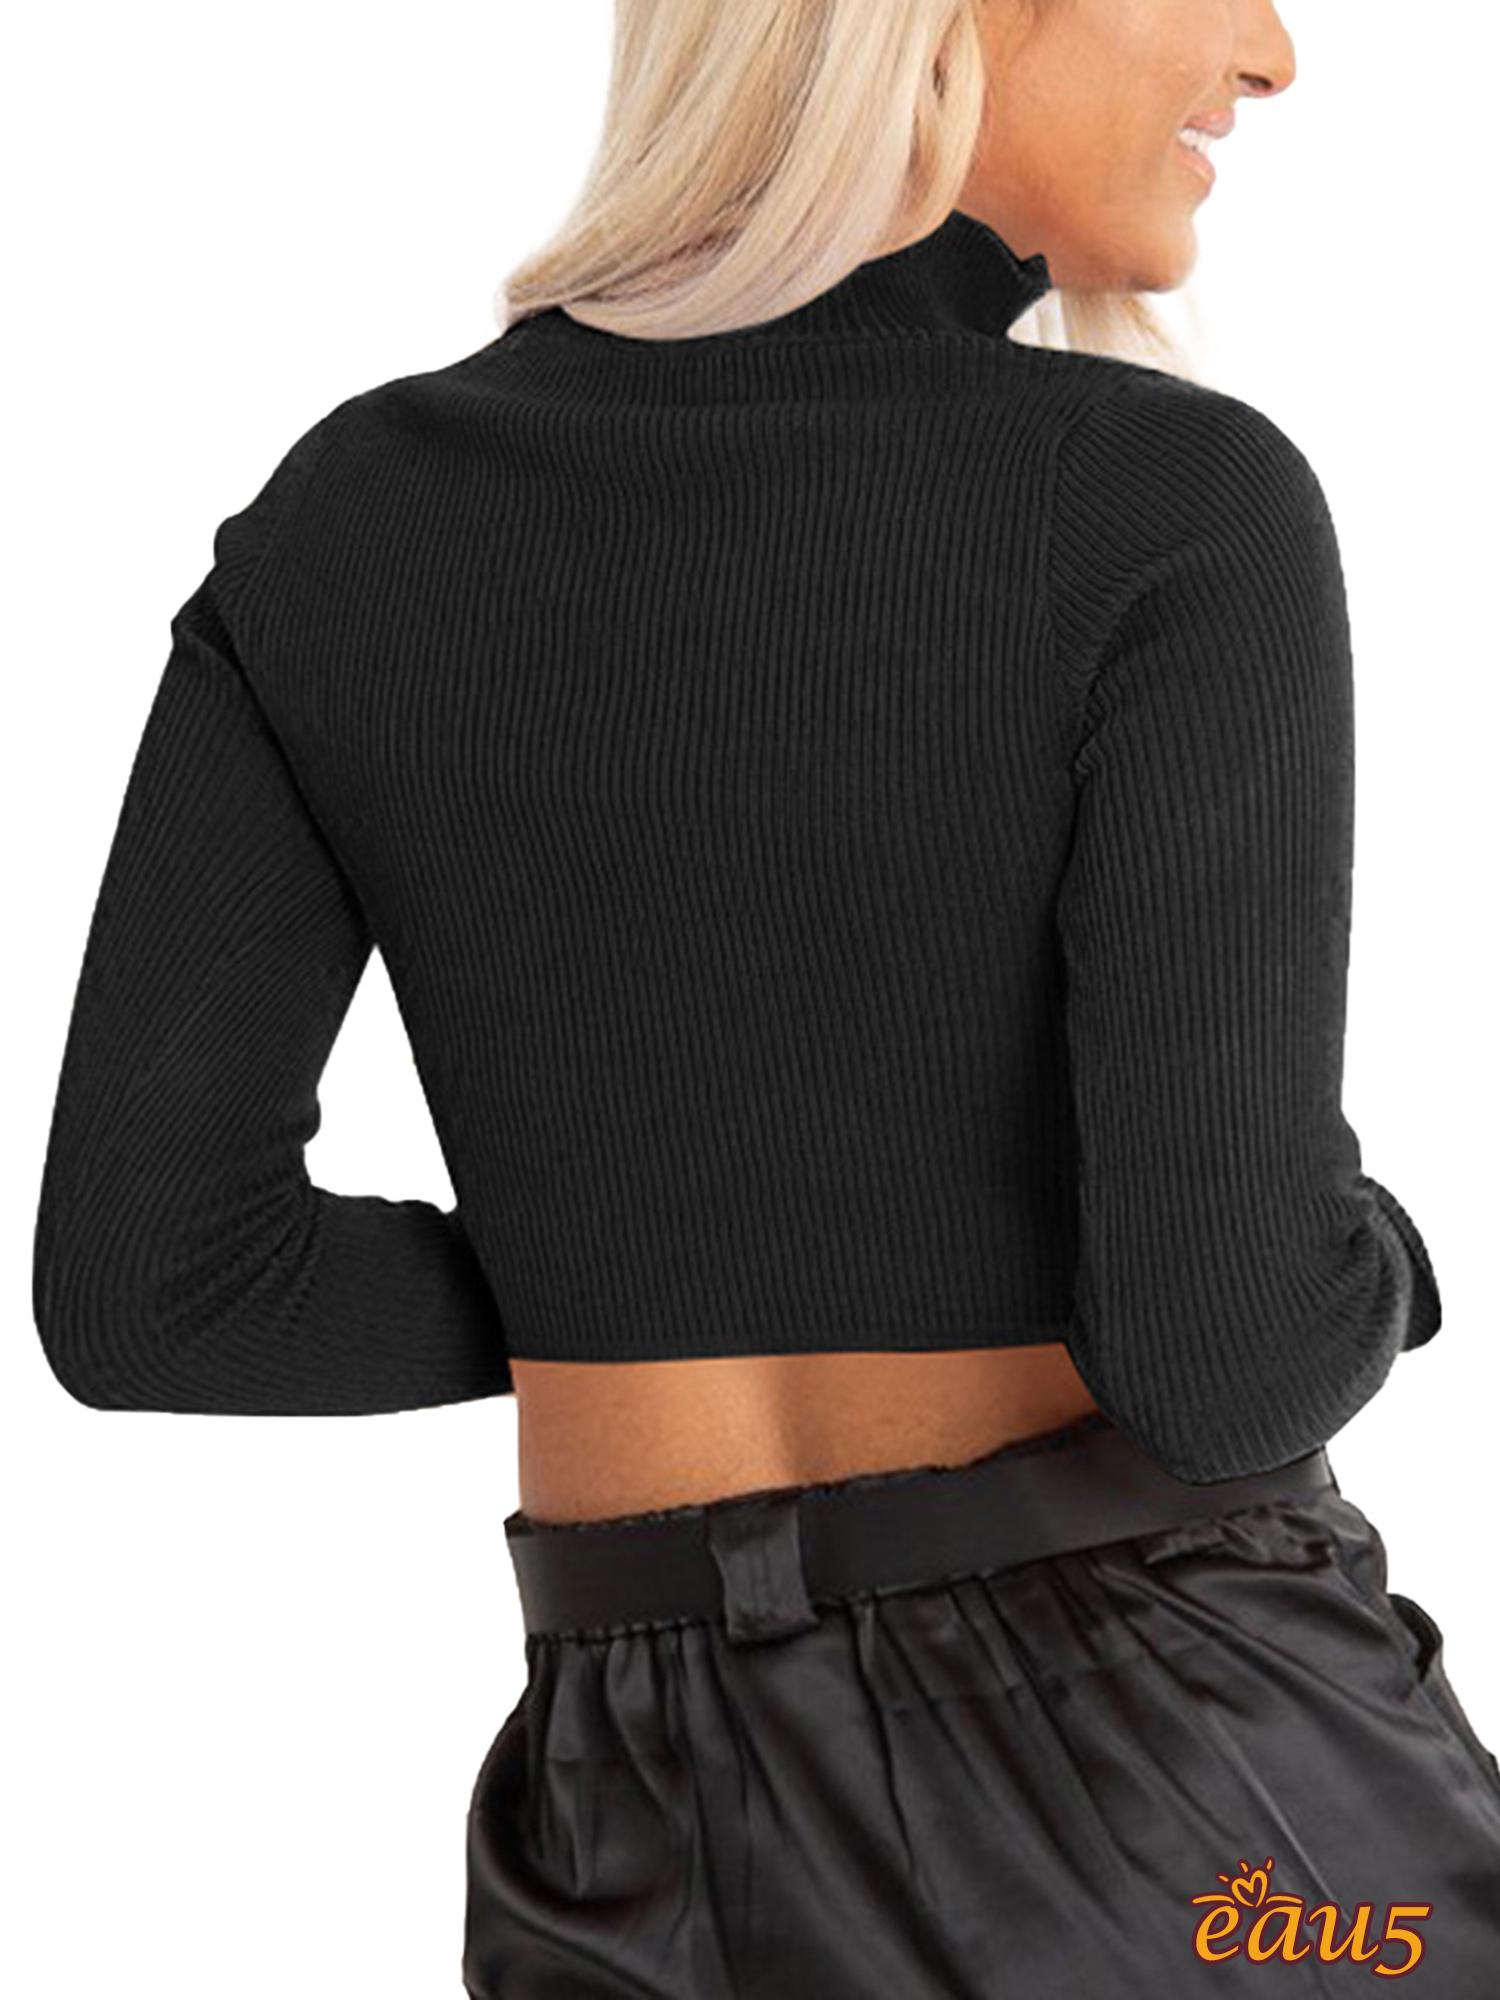 ☜♠☞Women´s Rib Knit Crop Top Long Sleeve Stand Collar Zipper Front Slim Fit Solid Color Basic Tee Shirt